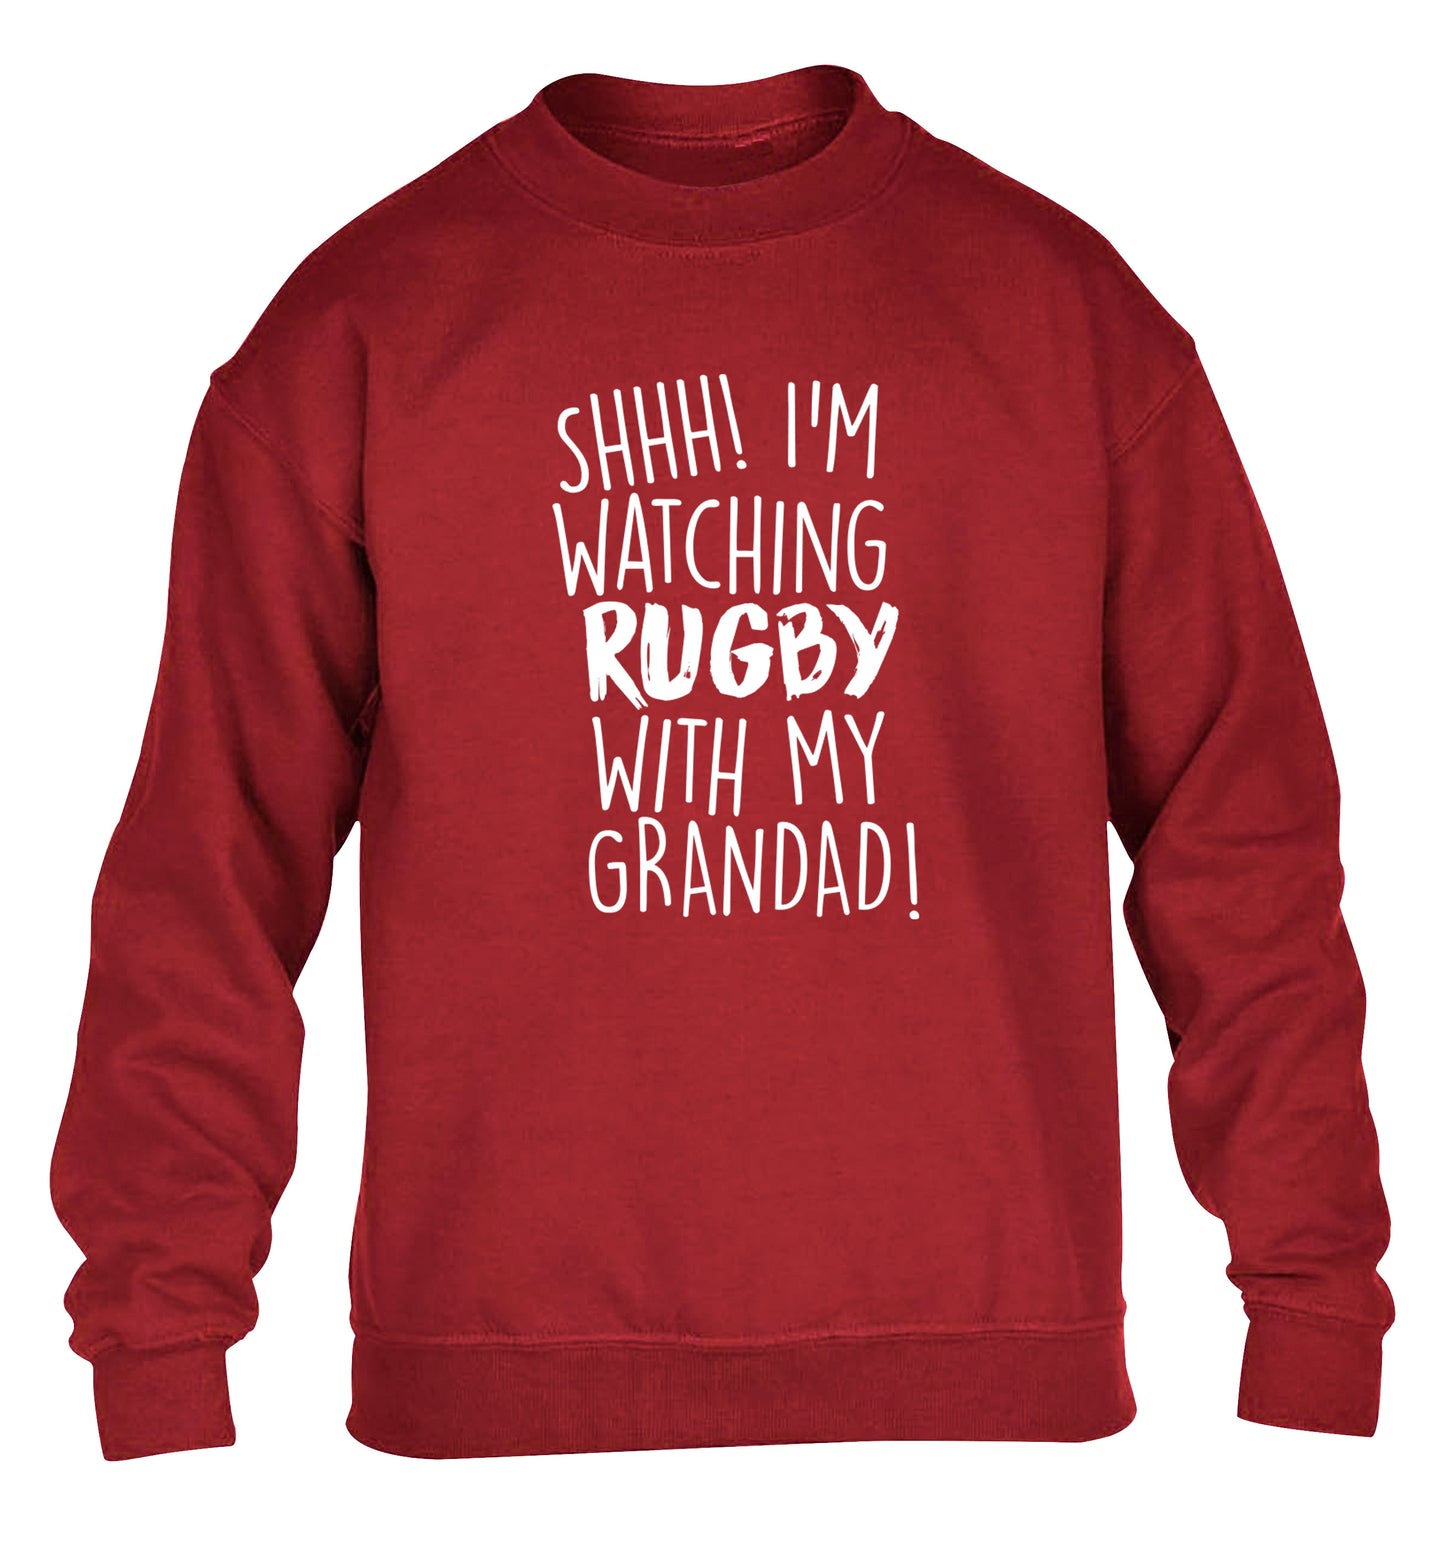 Shh I'm watching rugby with my grandaughter children's grey sweater 12-13 Years